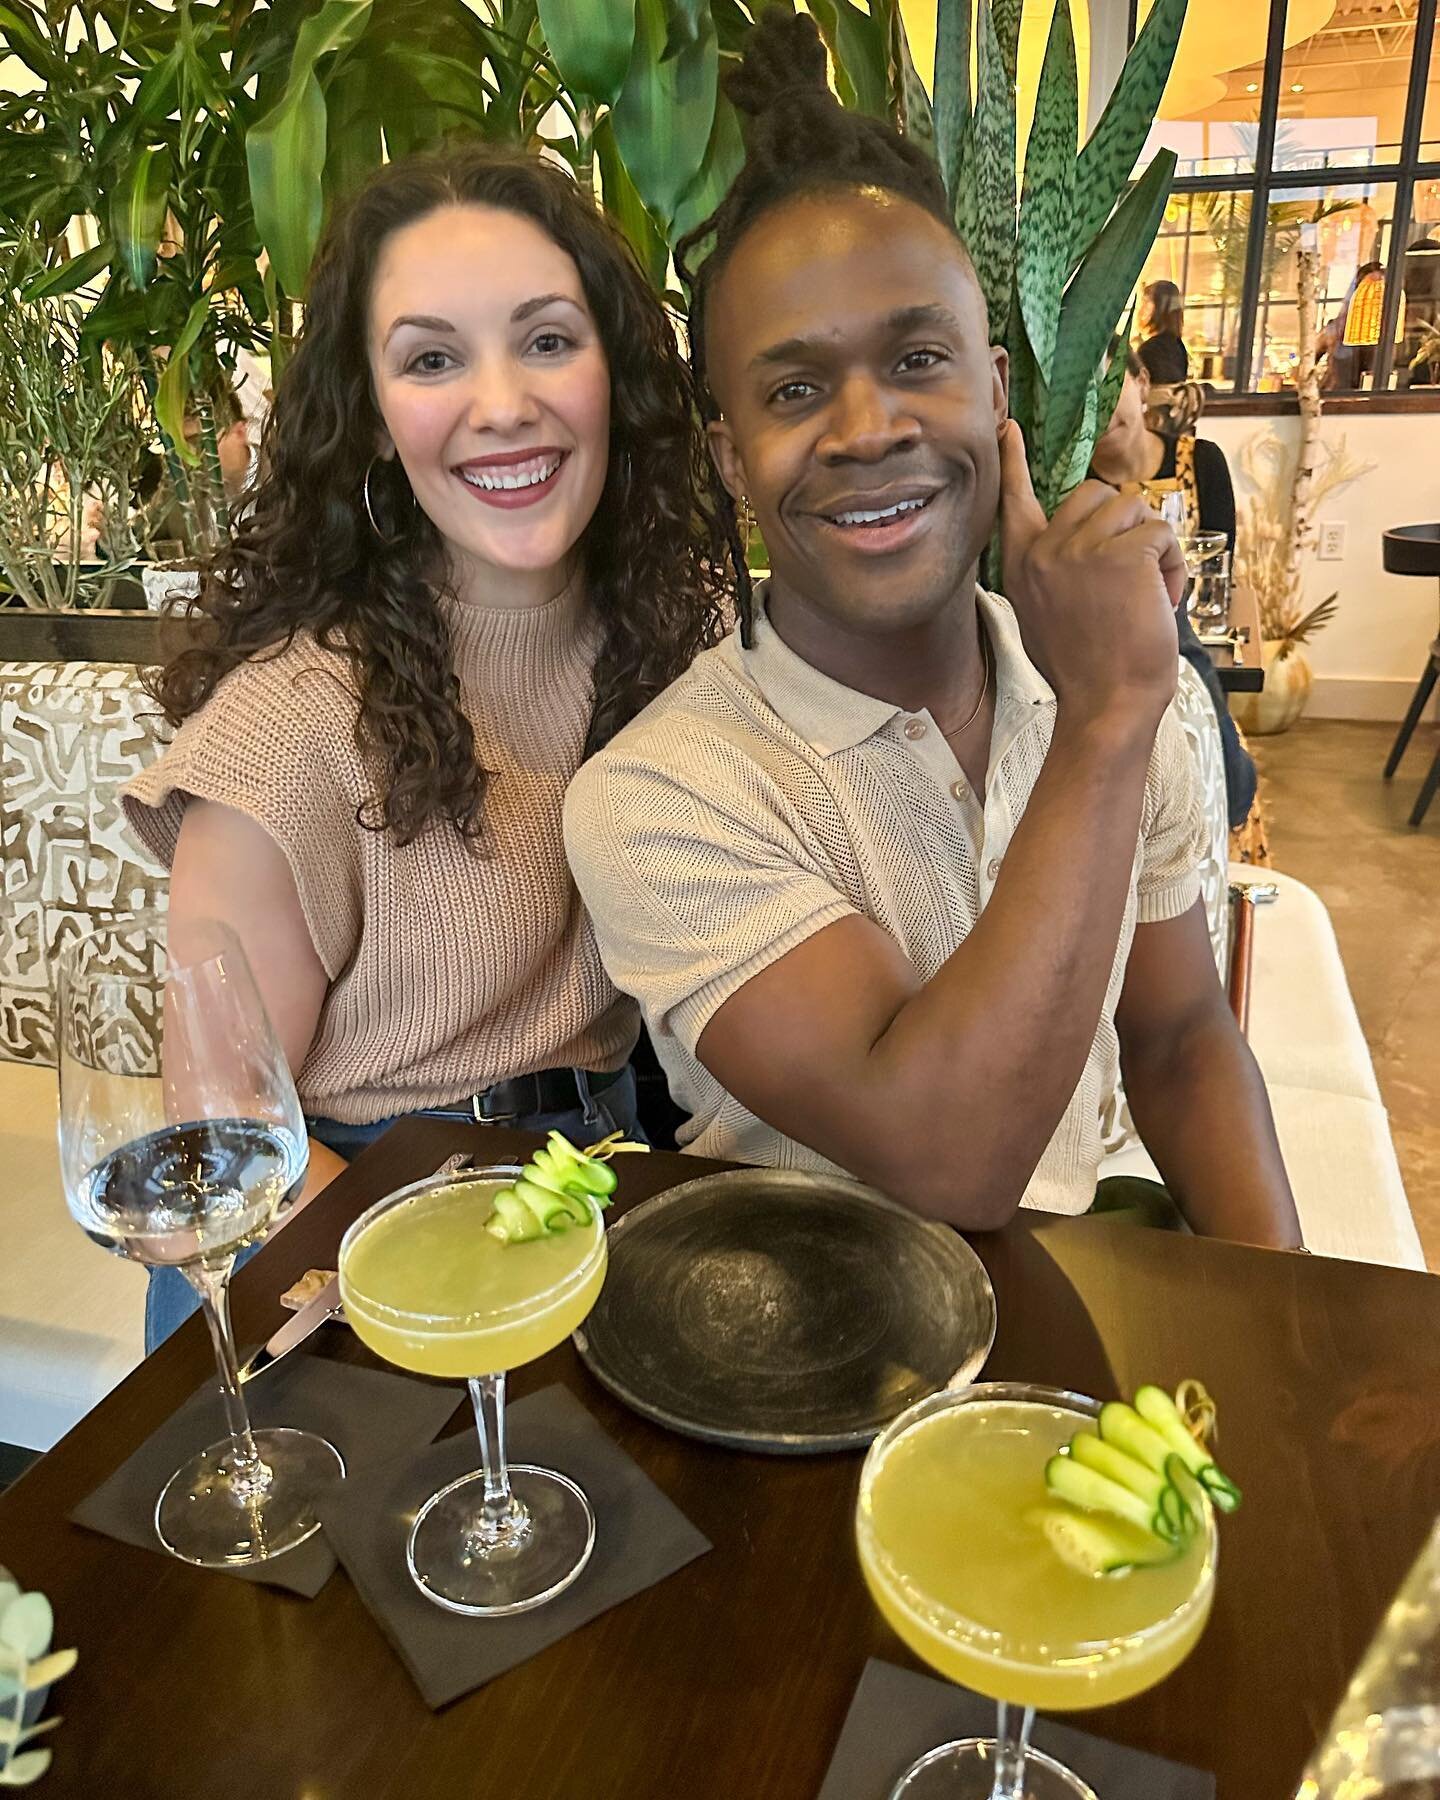 Could not ask for more at dinner last night. I got to see my nugget and eat food that was on @bravotopchef Fangirling so hard! 🤩

Swipe to see Chef Evelyn&rsquo;s winning Como La Flor dish and just how handsome my date was. #nugget #jun #nerdingout 